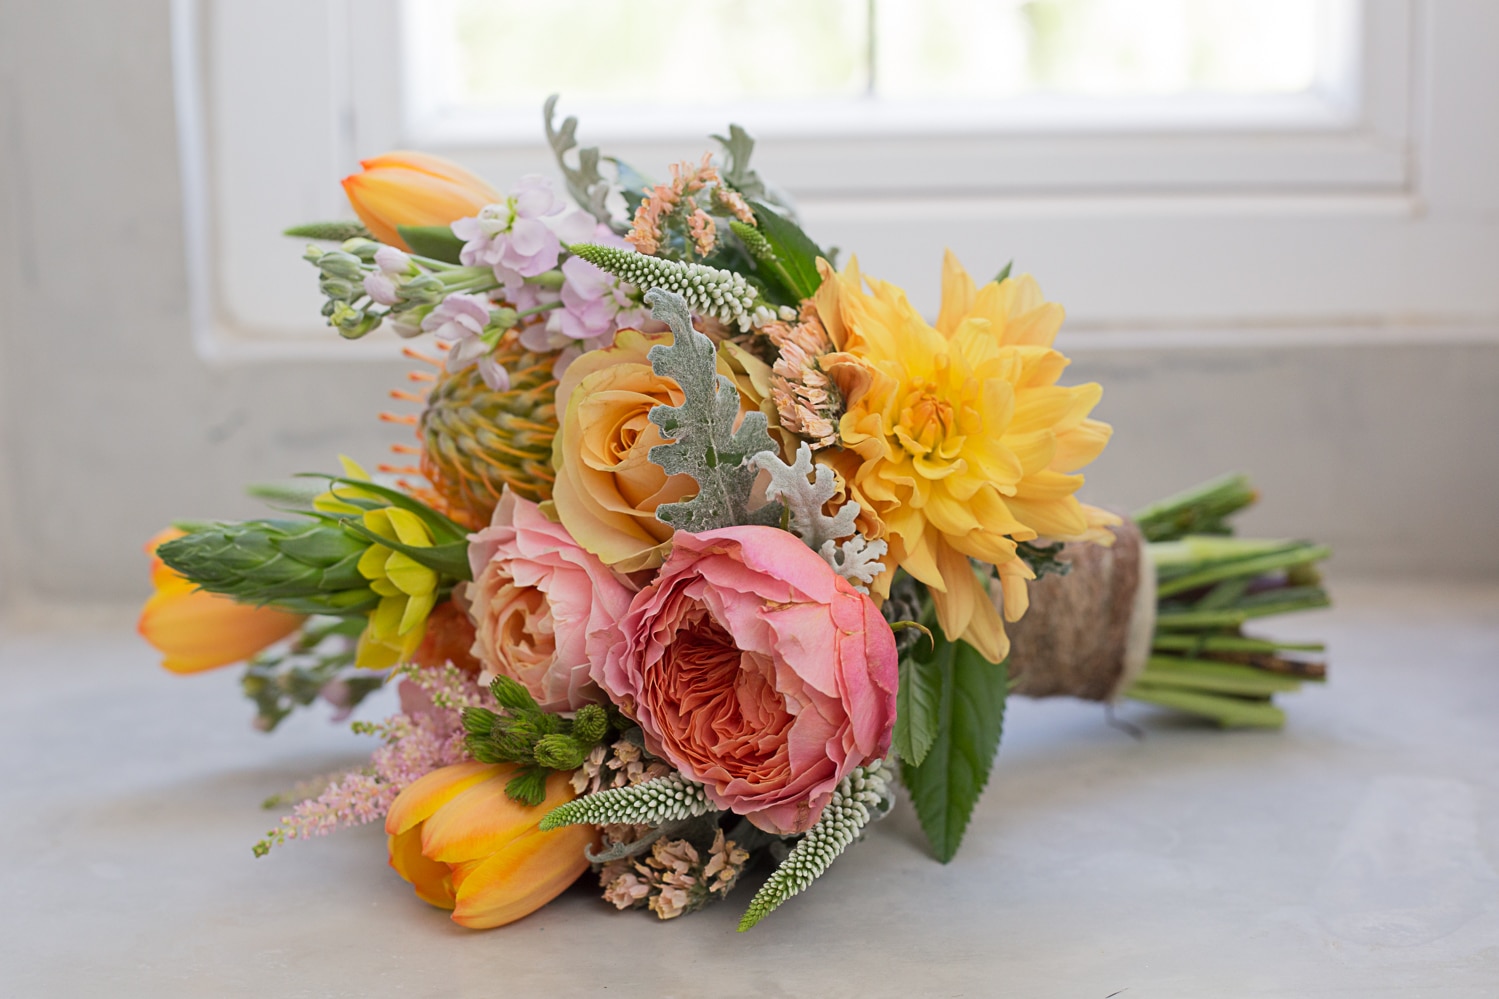 Wedding Bouquet: What’s your style?